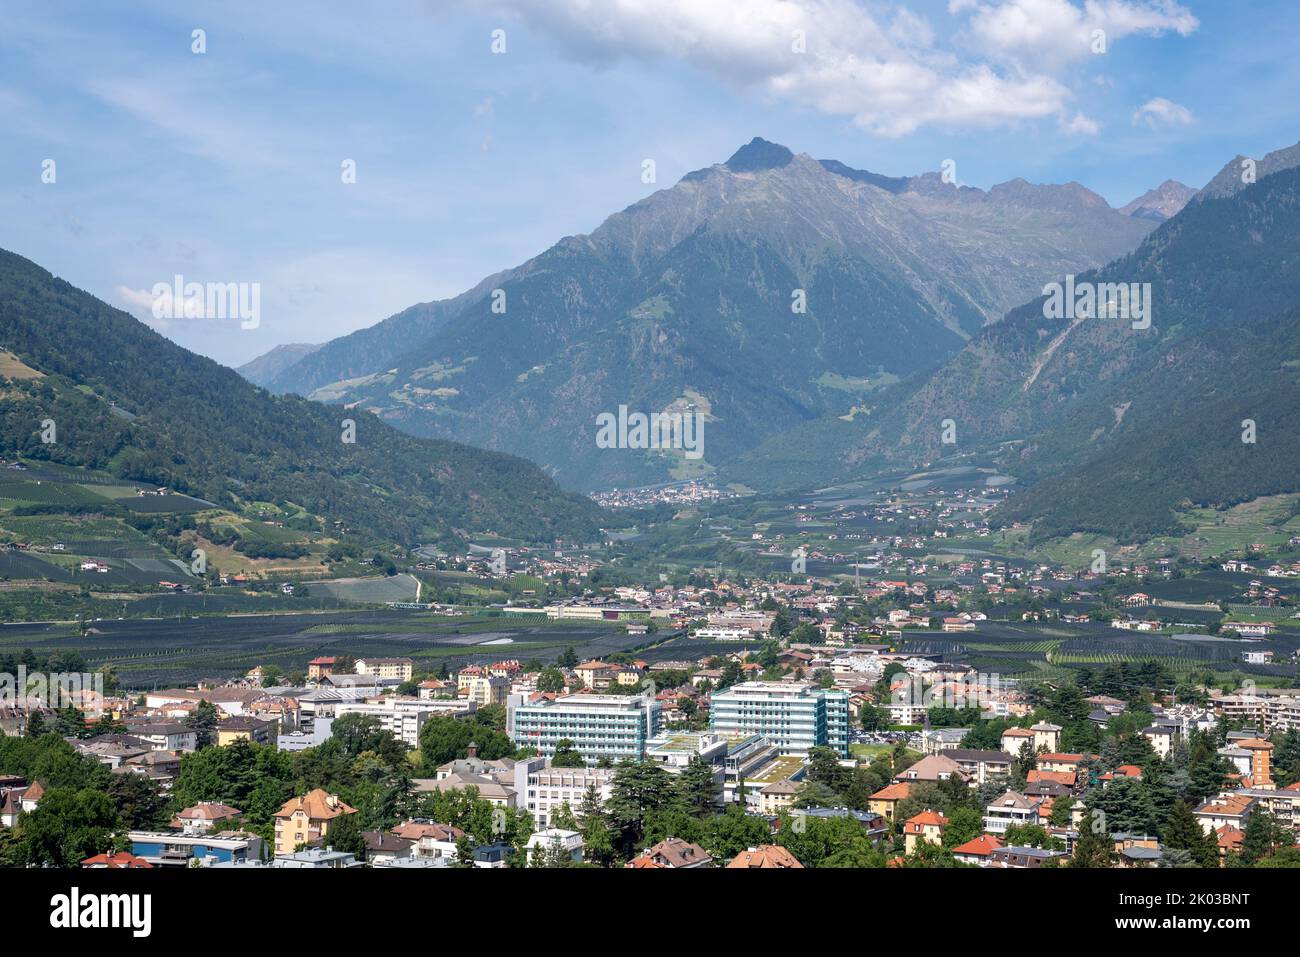 Merano countryside, apple orchards, residential houses, spa town Merano, South Tyrol, Italy Stock Photo